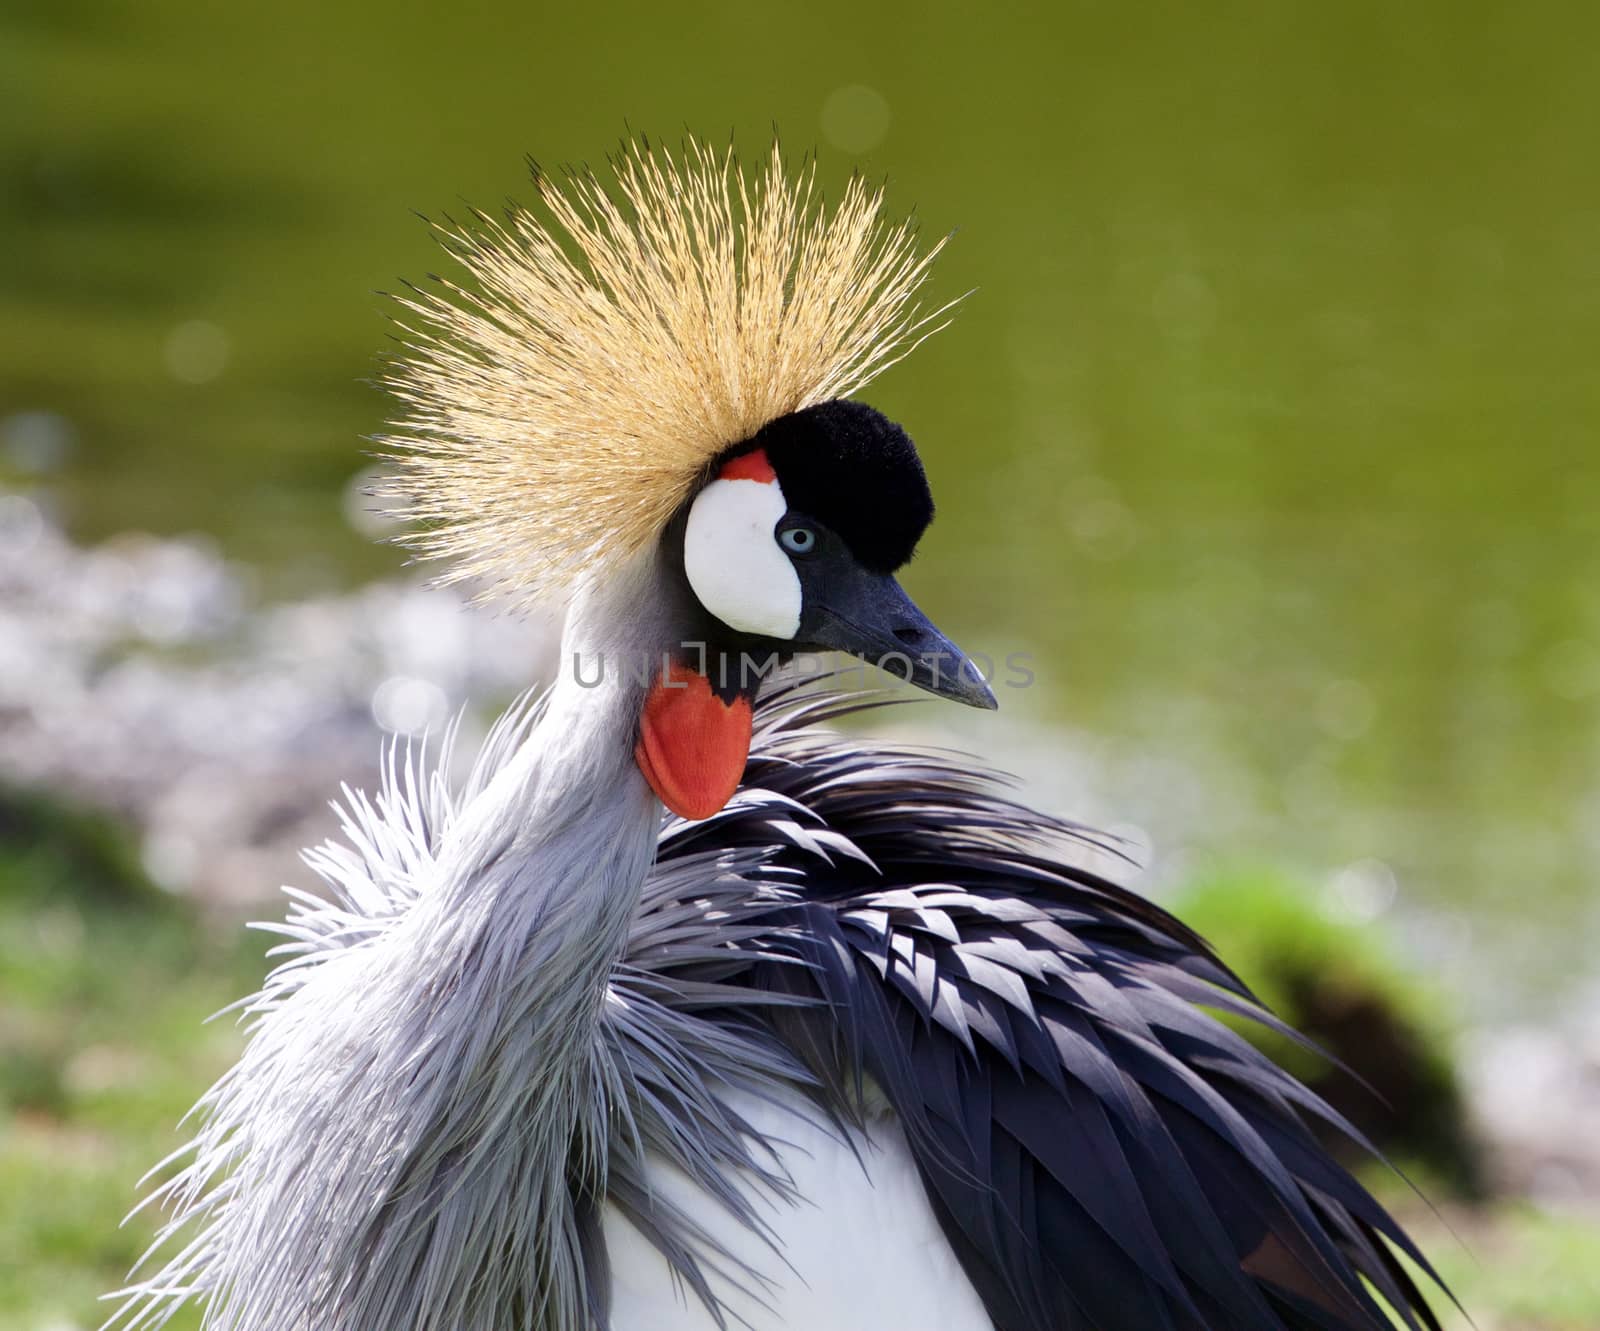 The portrait of the beautiful East African Crowned Crane by teo